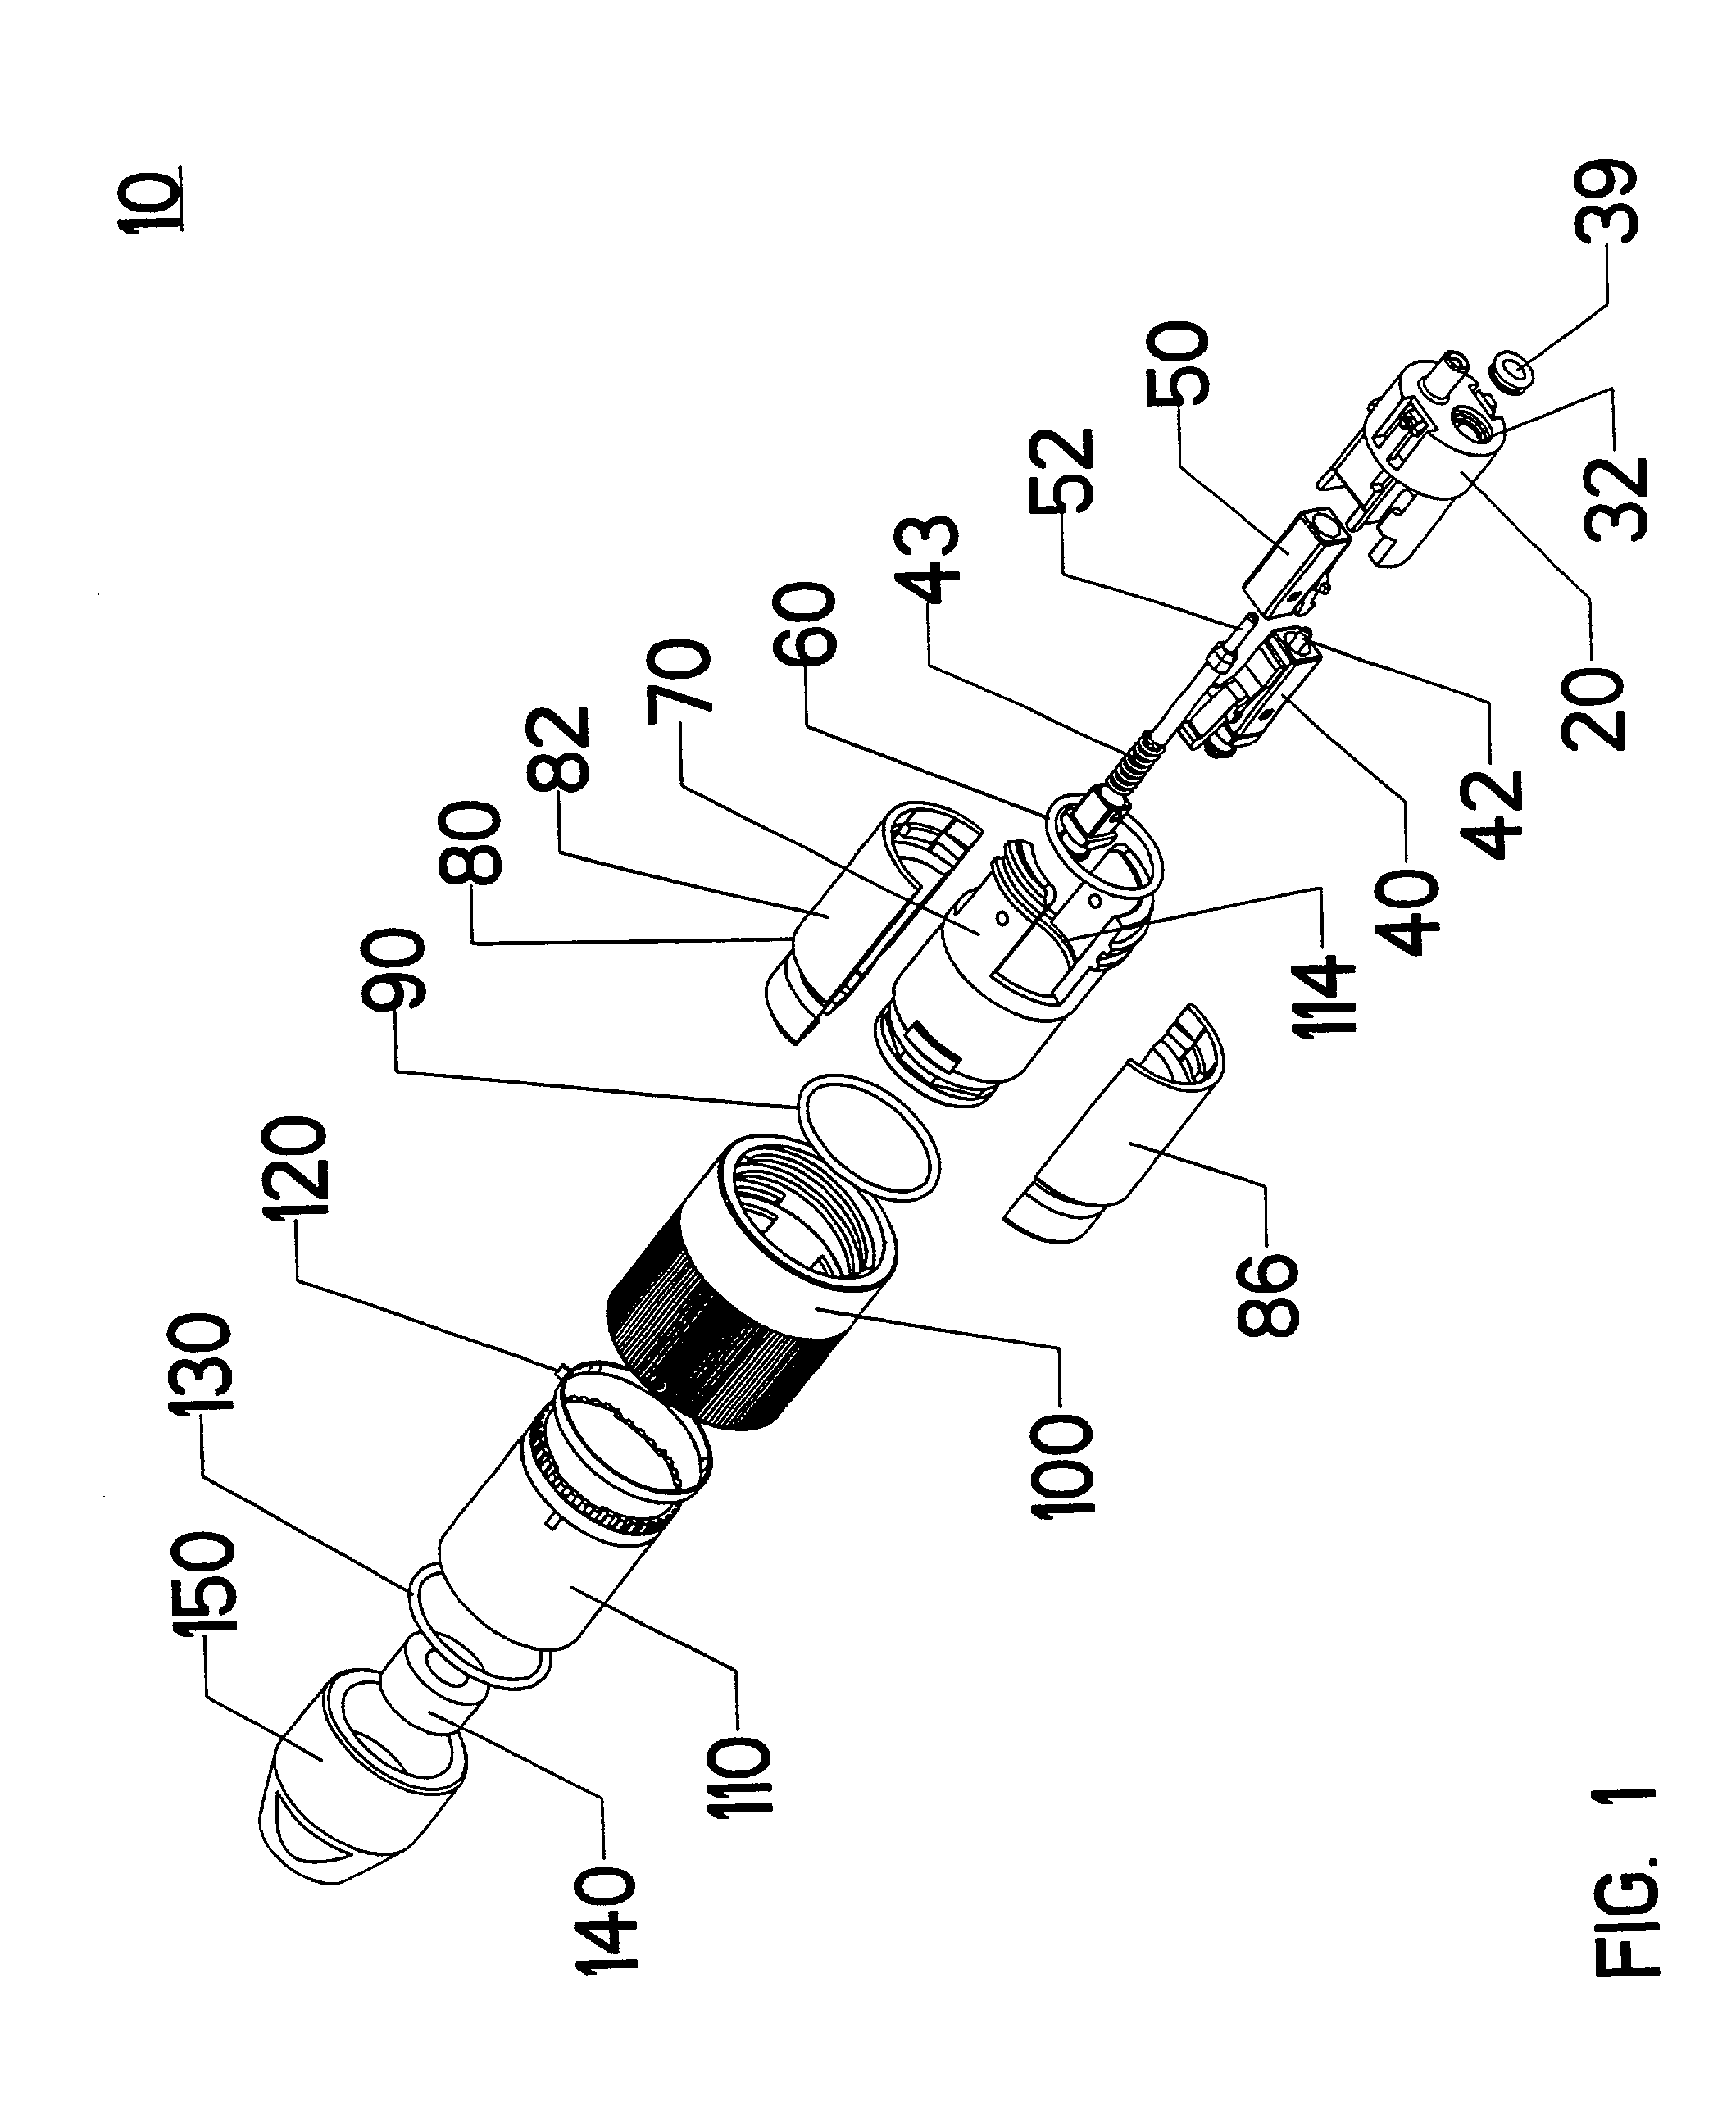 Field repairable hermaphroditic connector tool